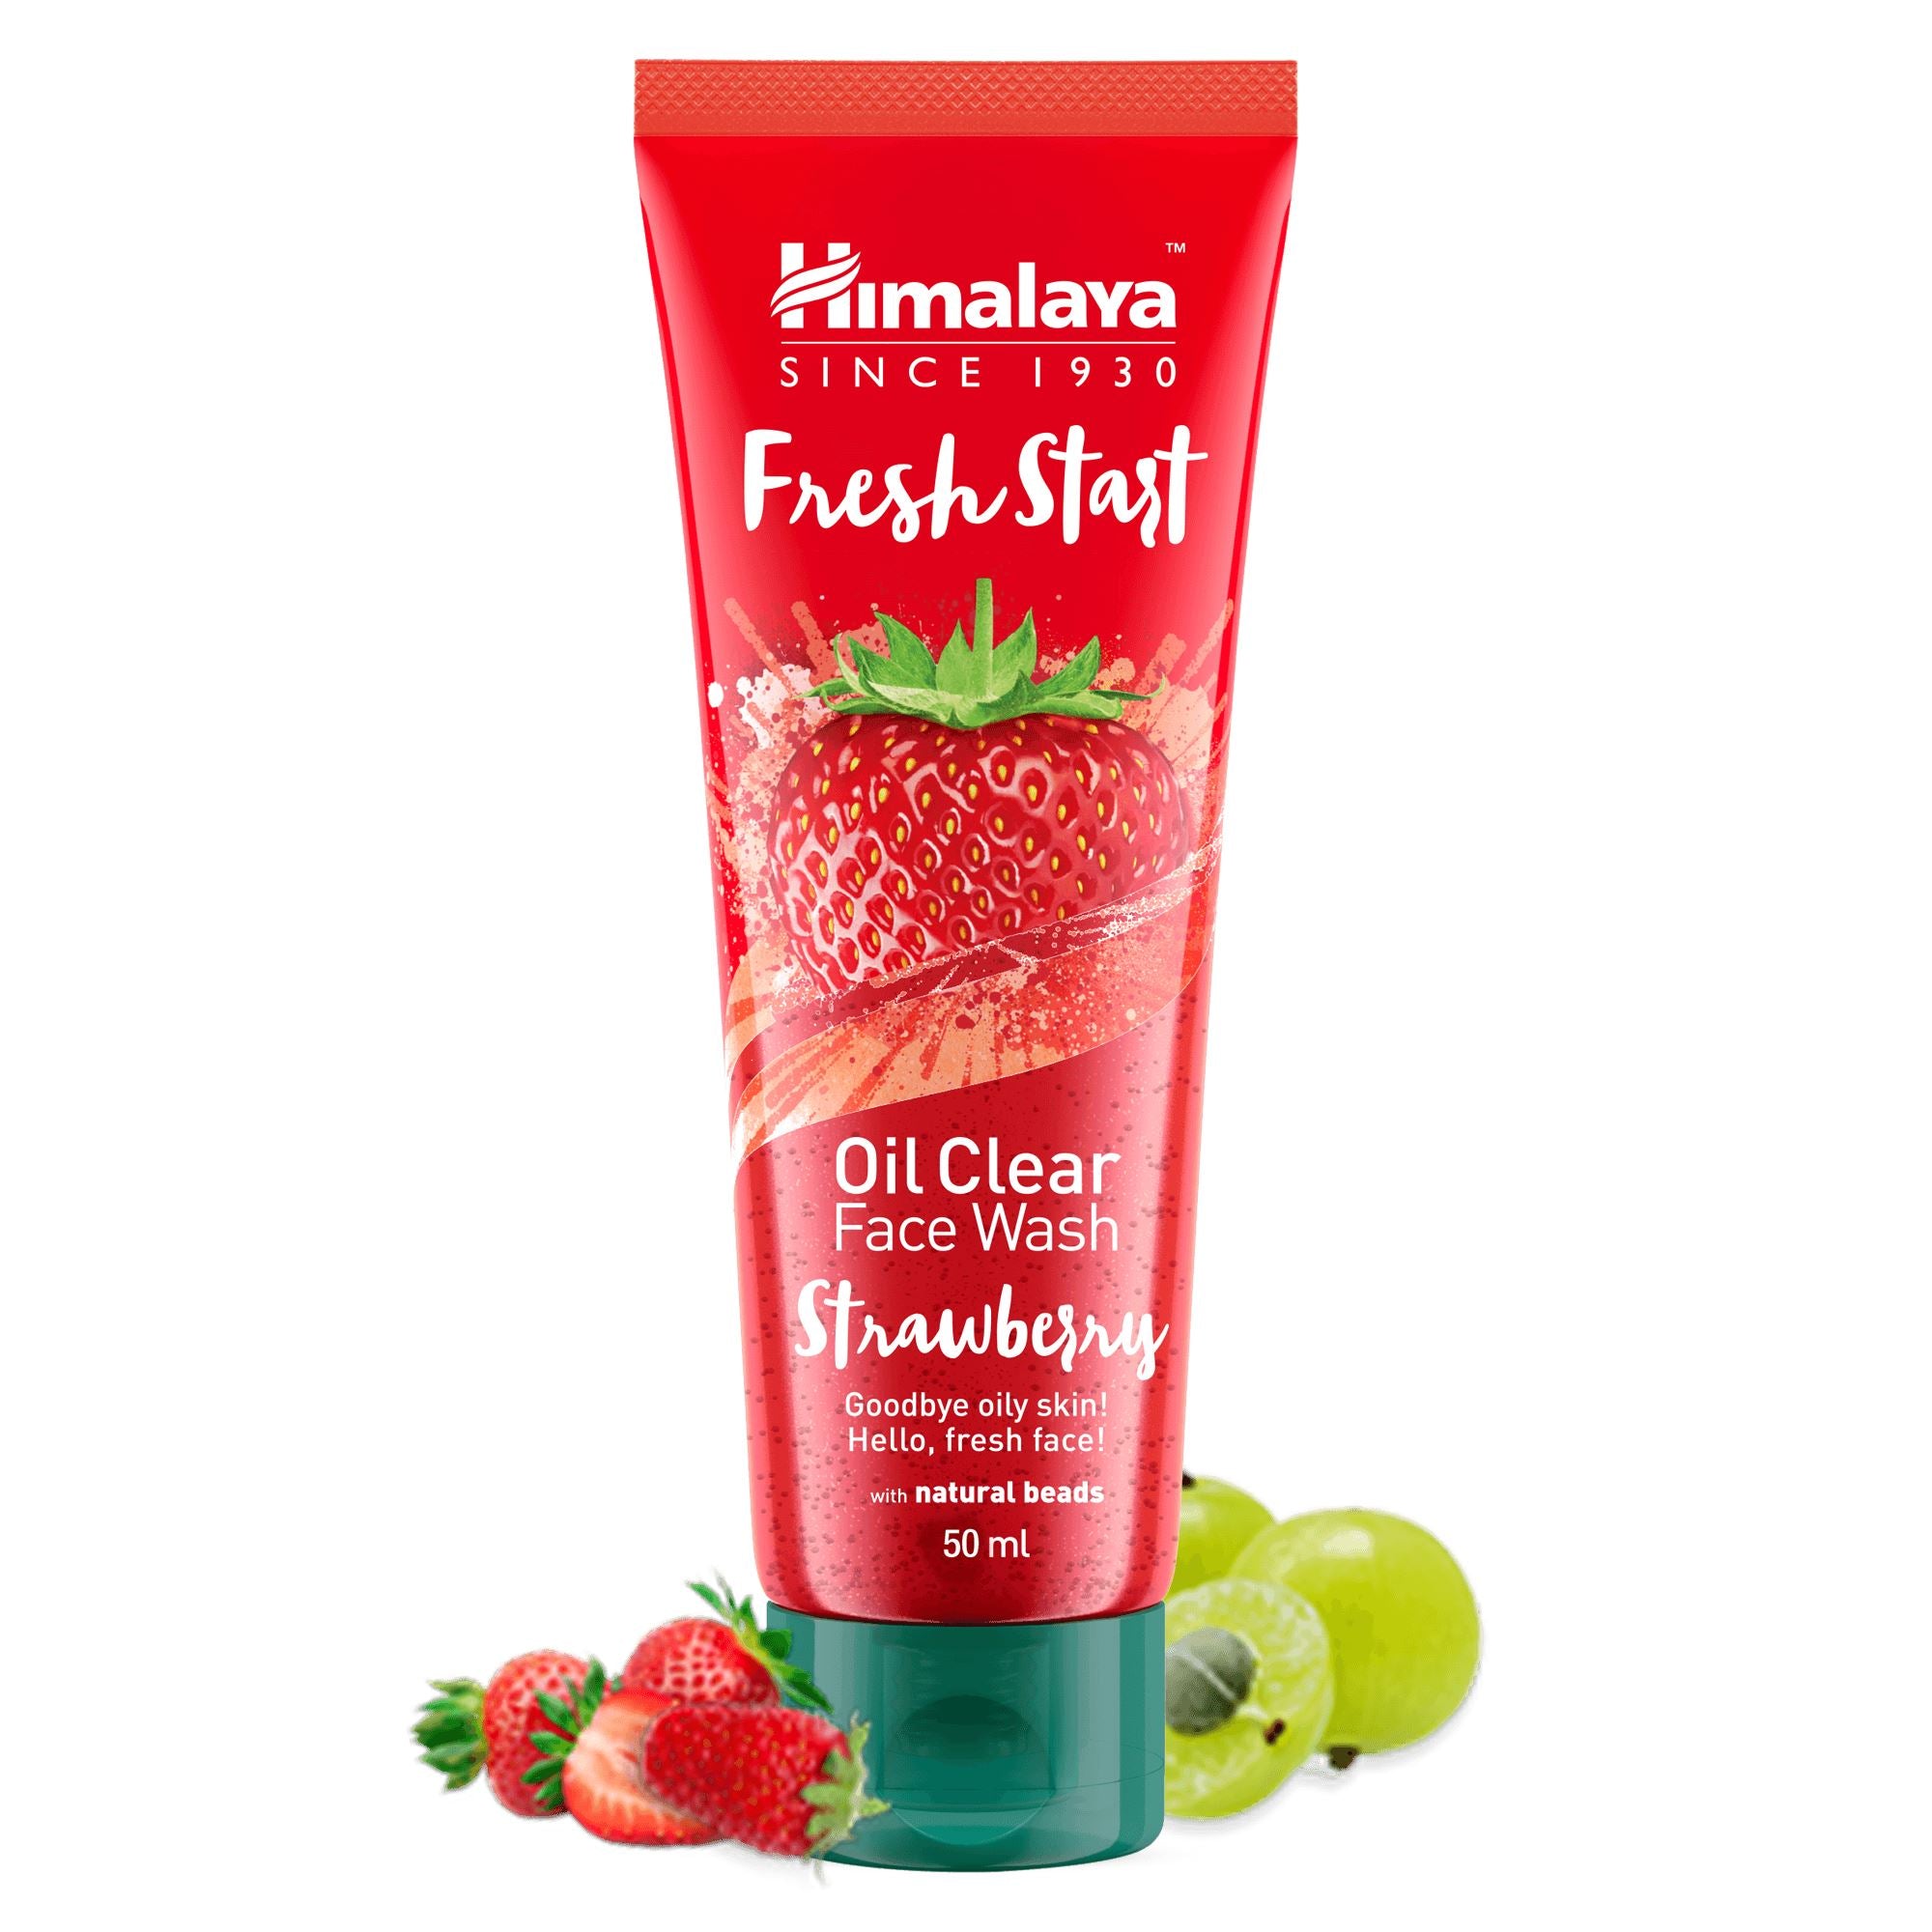 Himalaya Fresh Start Oil Clear Strawberry Face Wash 50ml - Helps remove excess oil, dirt, and impurities